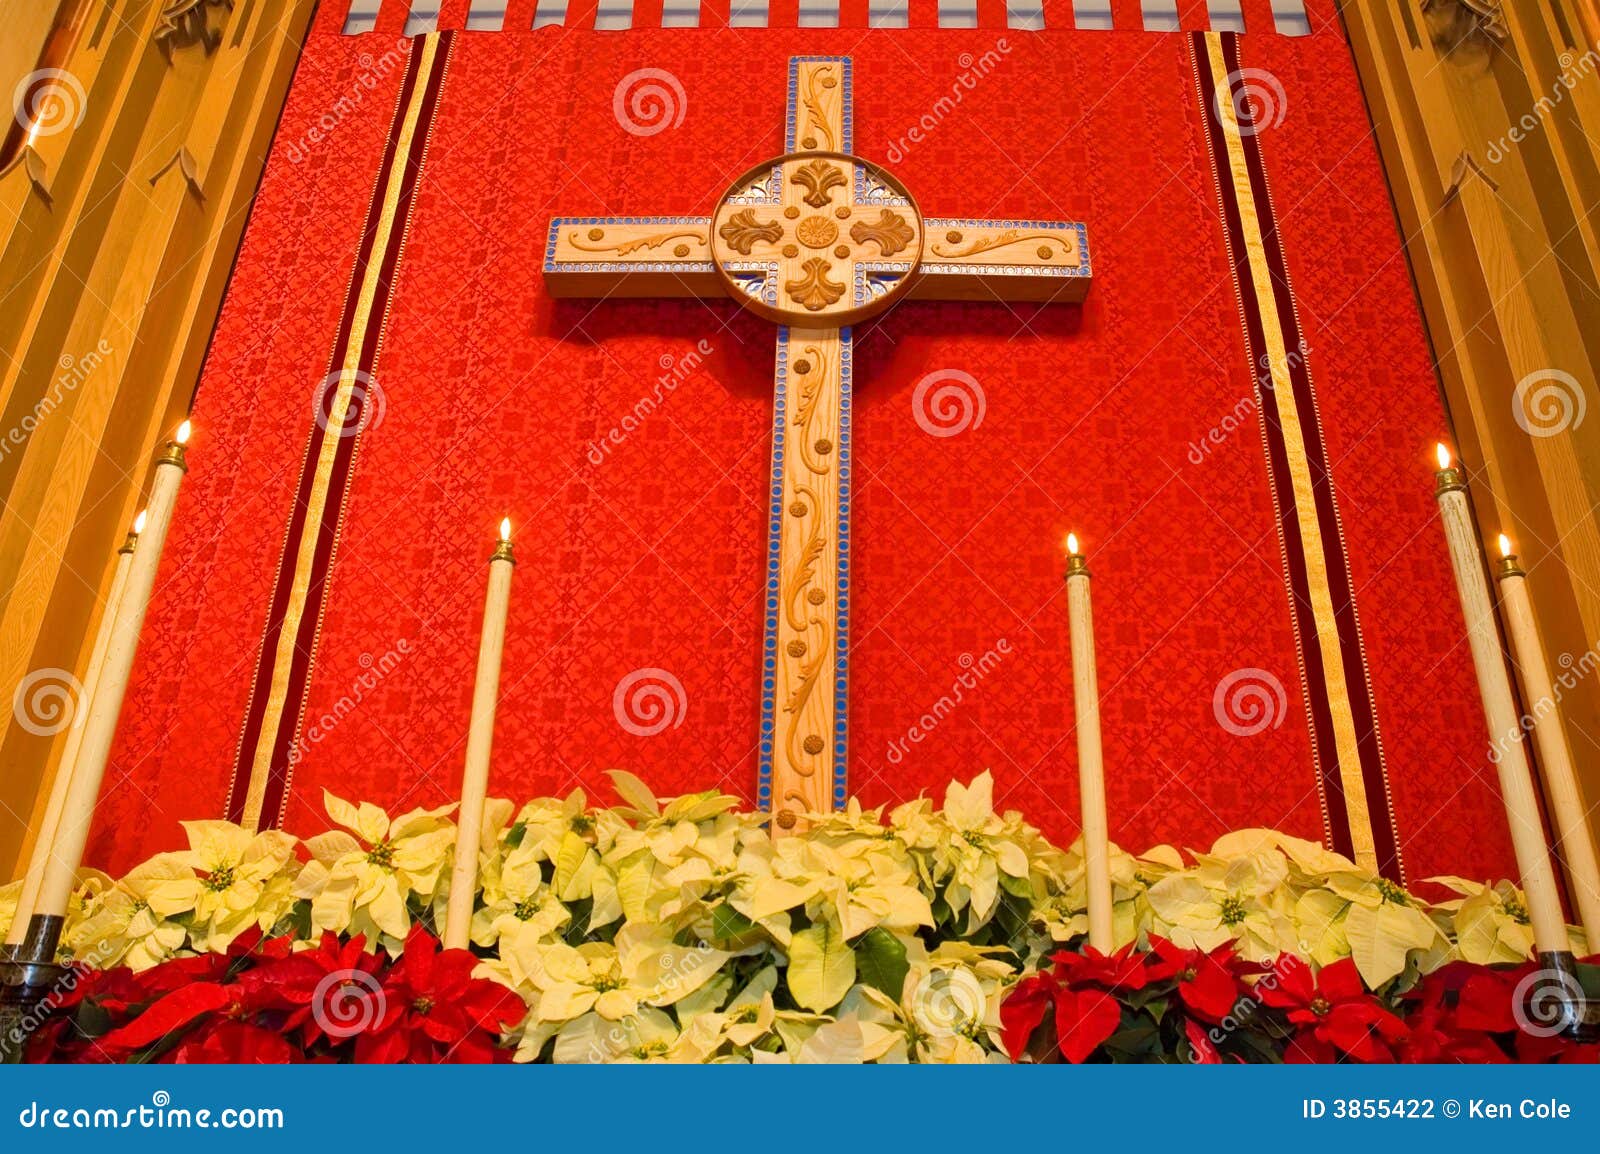 Church Altar With Poinsettias Stock Photography - Image 